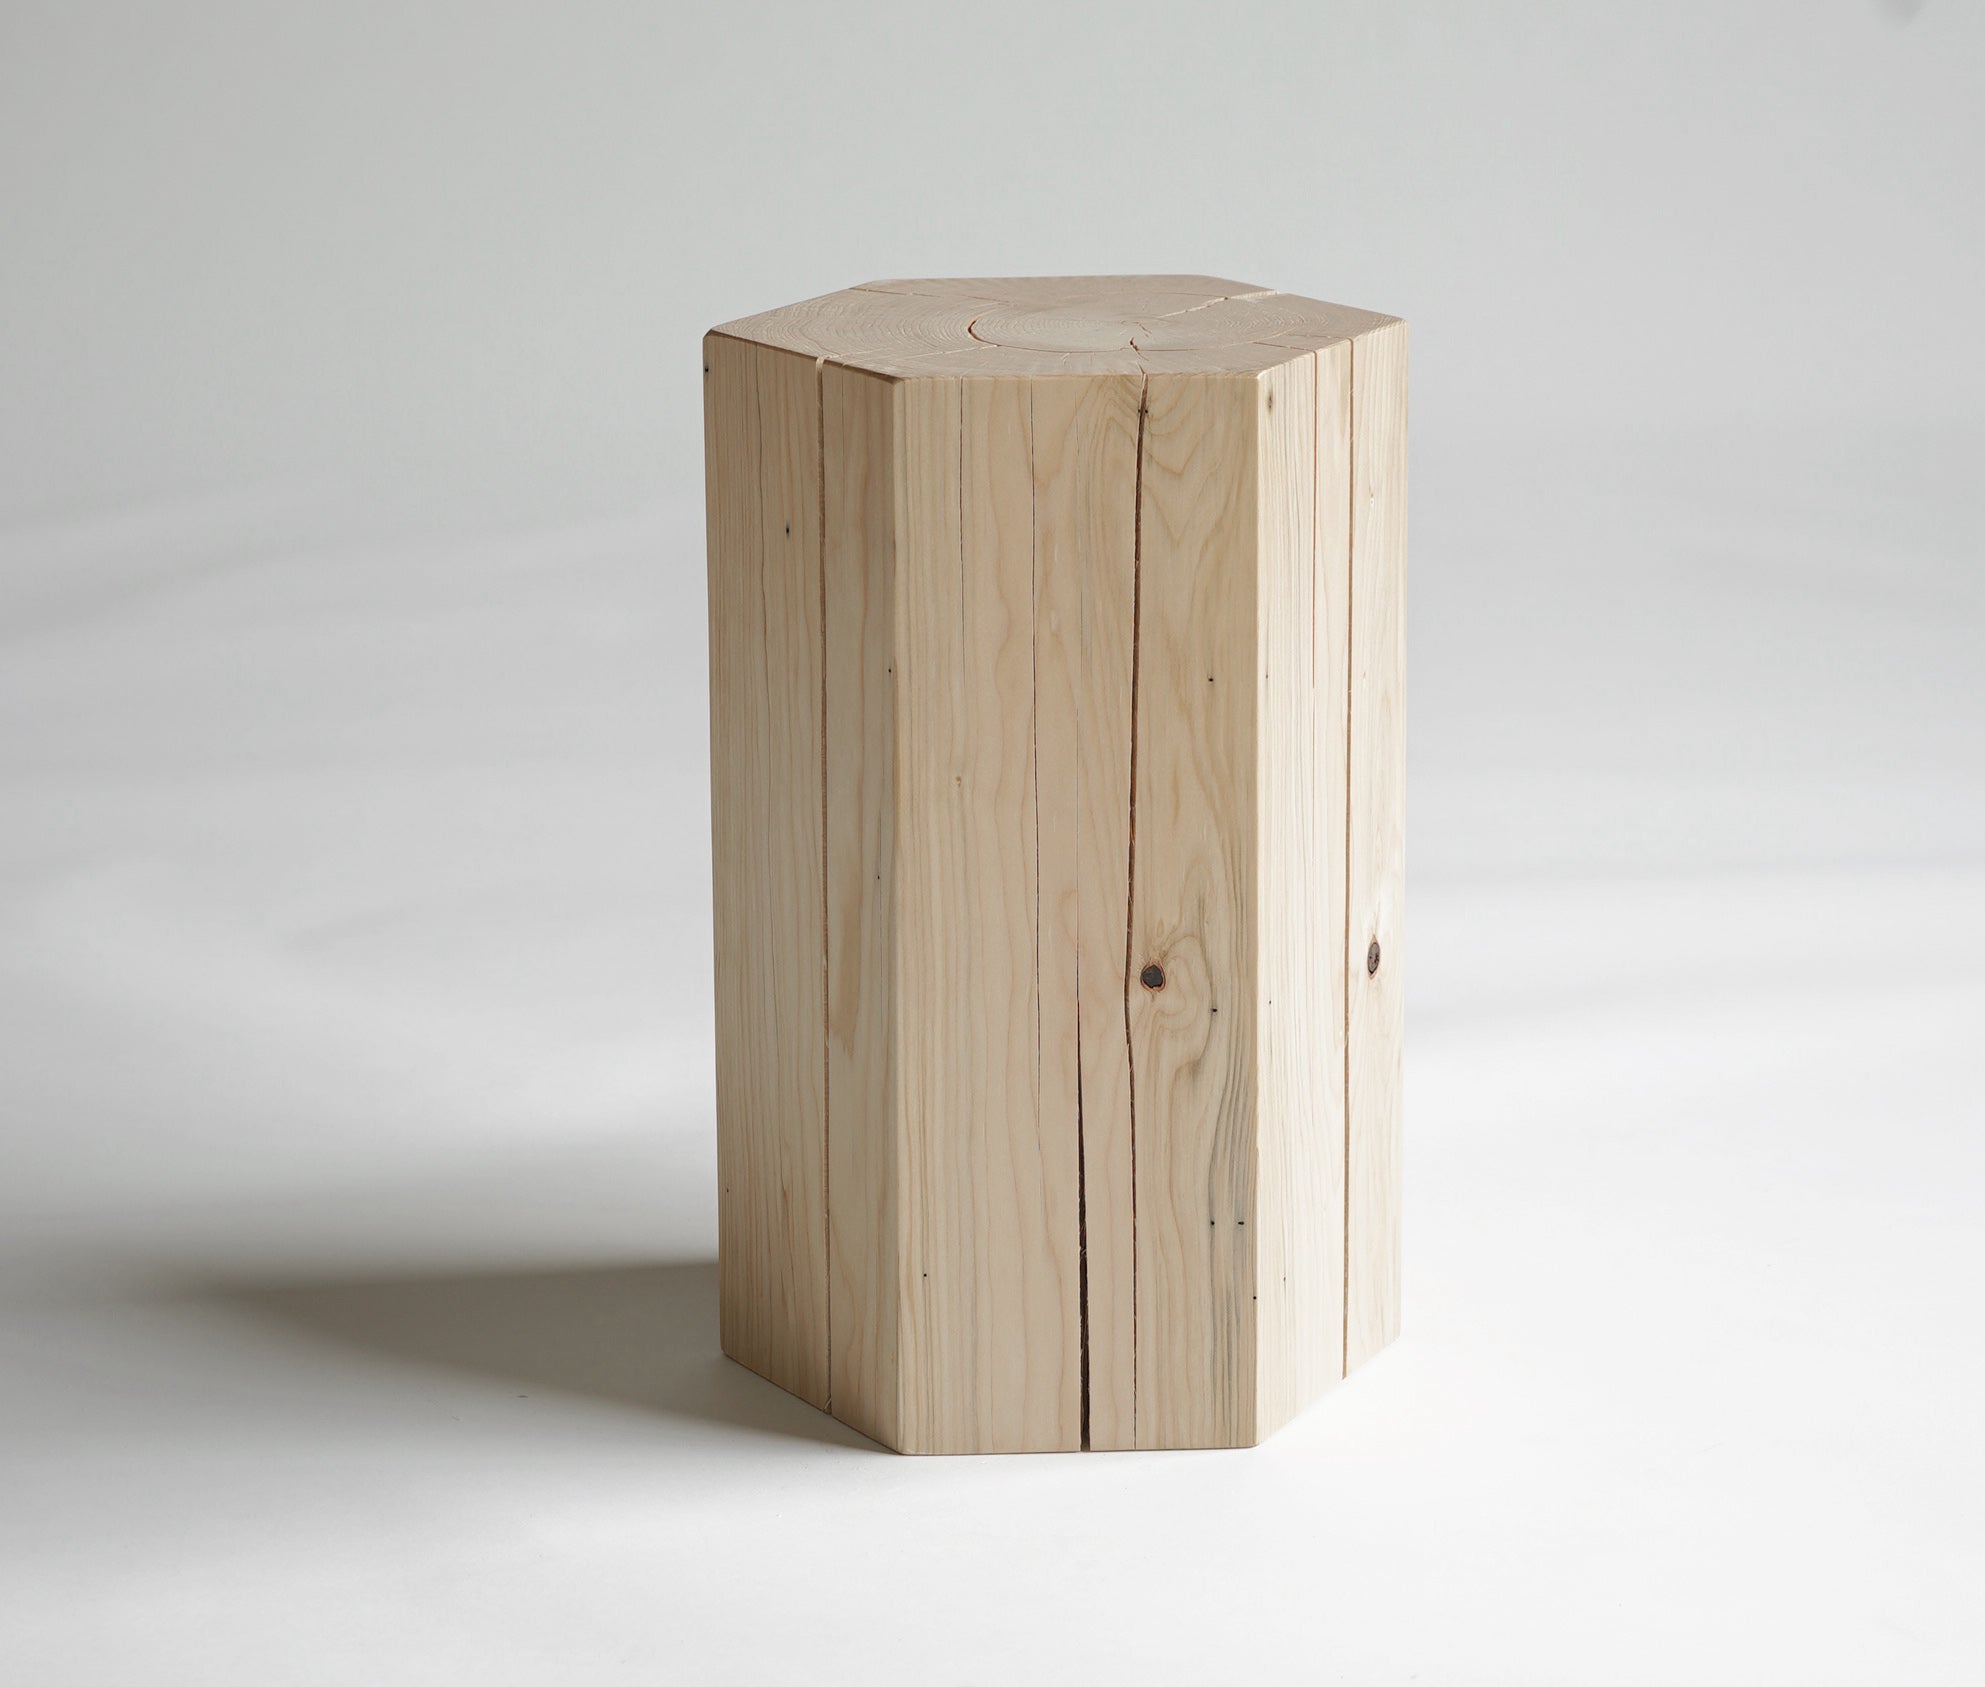 Hexagonal shaped solid hemlock stool with an oiled finish.